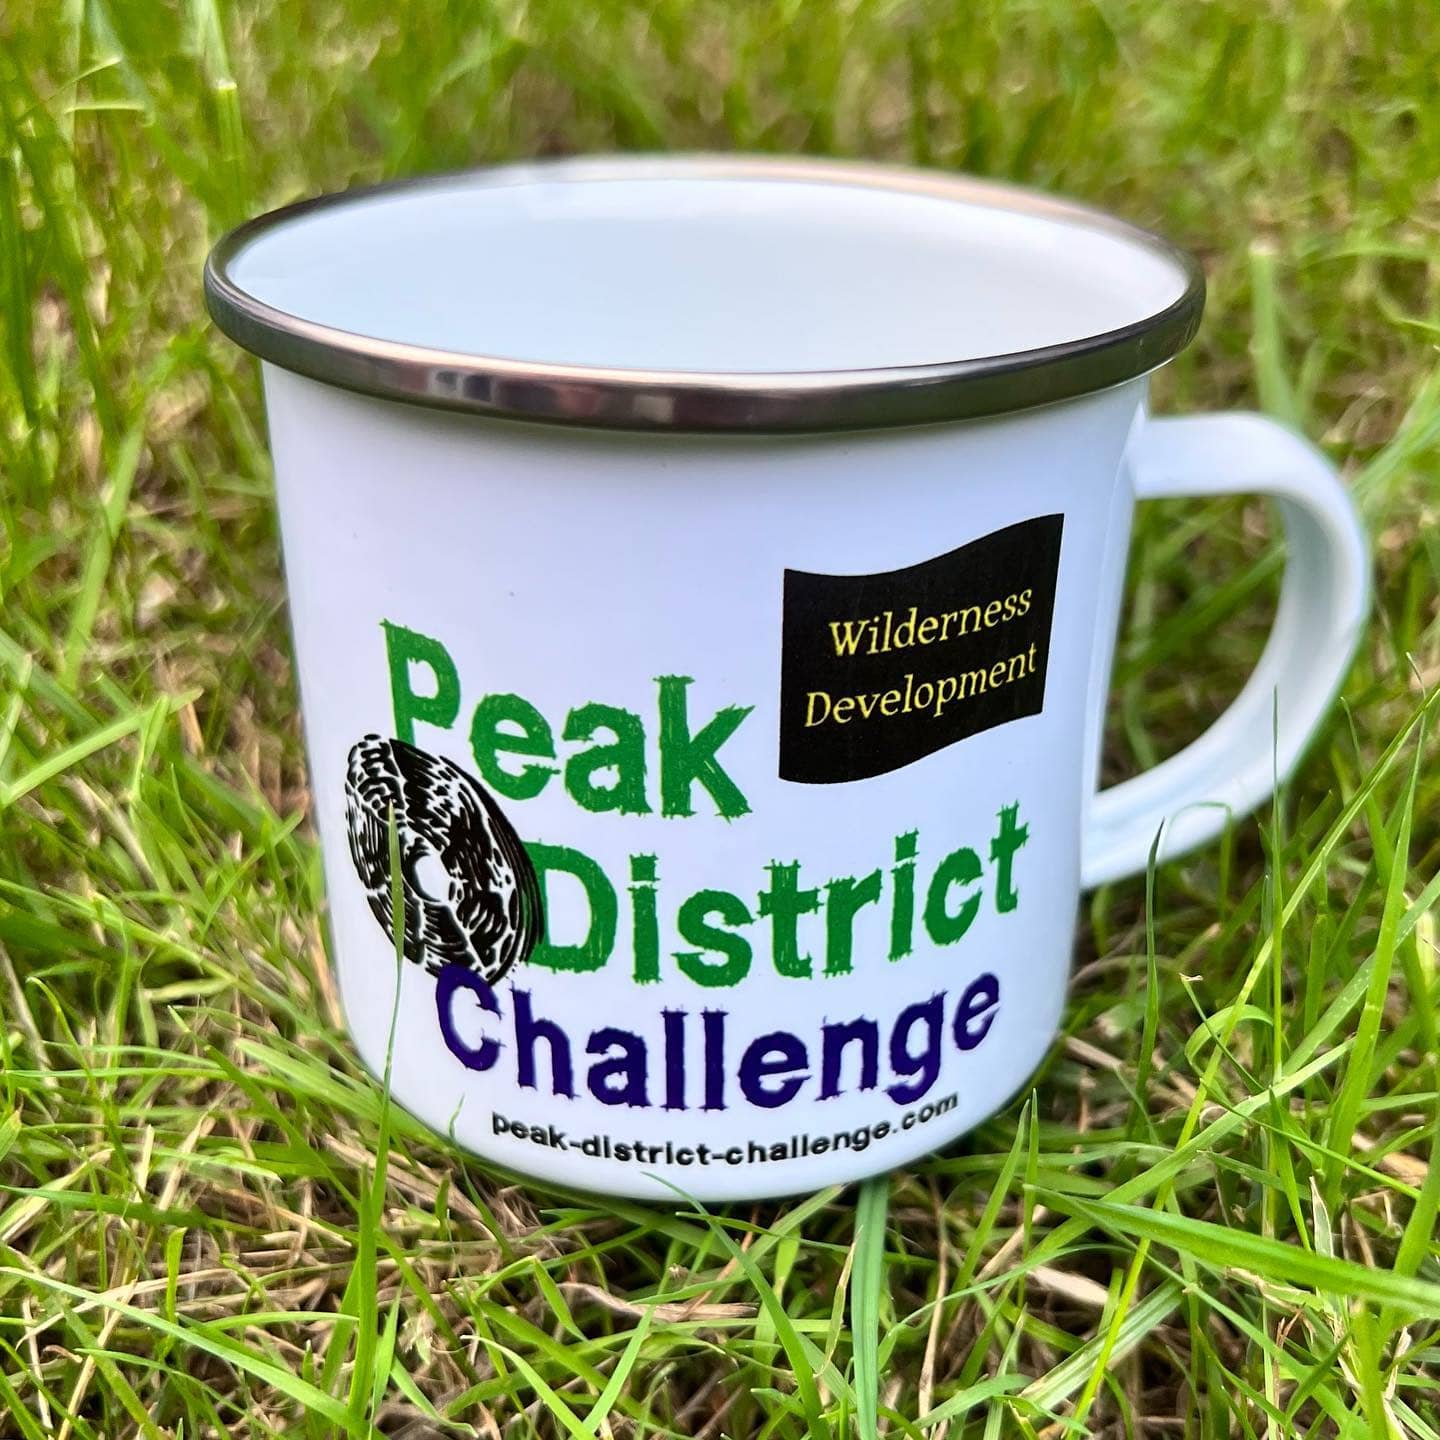 While we've always used compostable cups at the Peak District Challenge, this year we're aiming t...